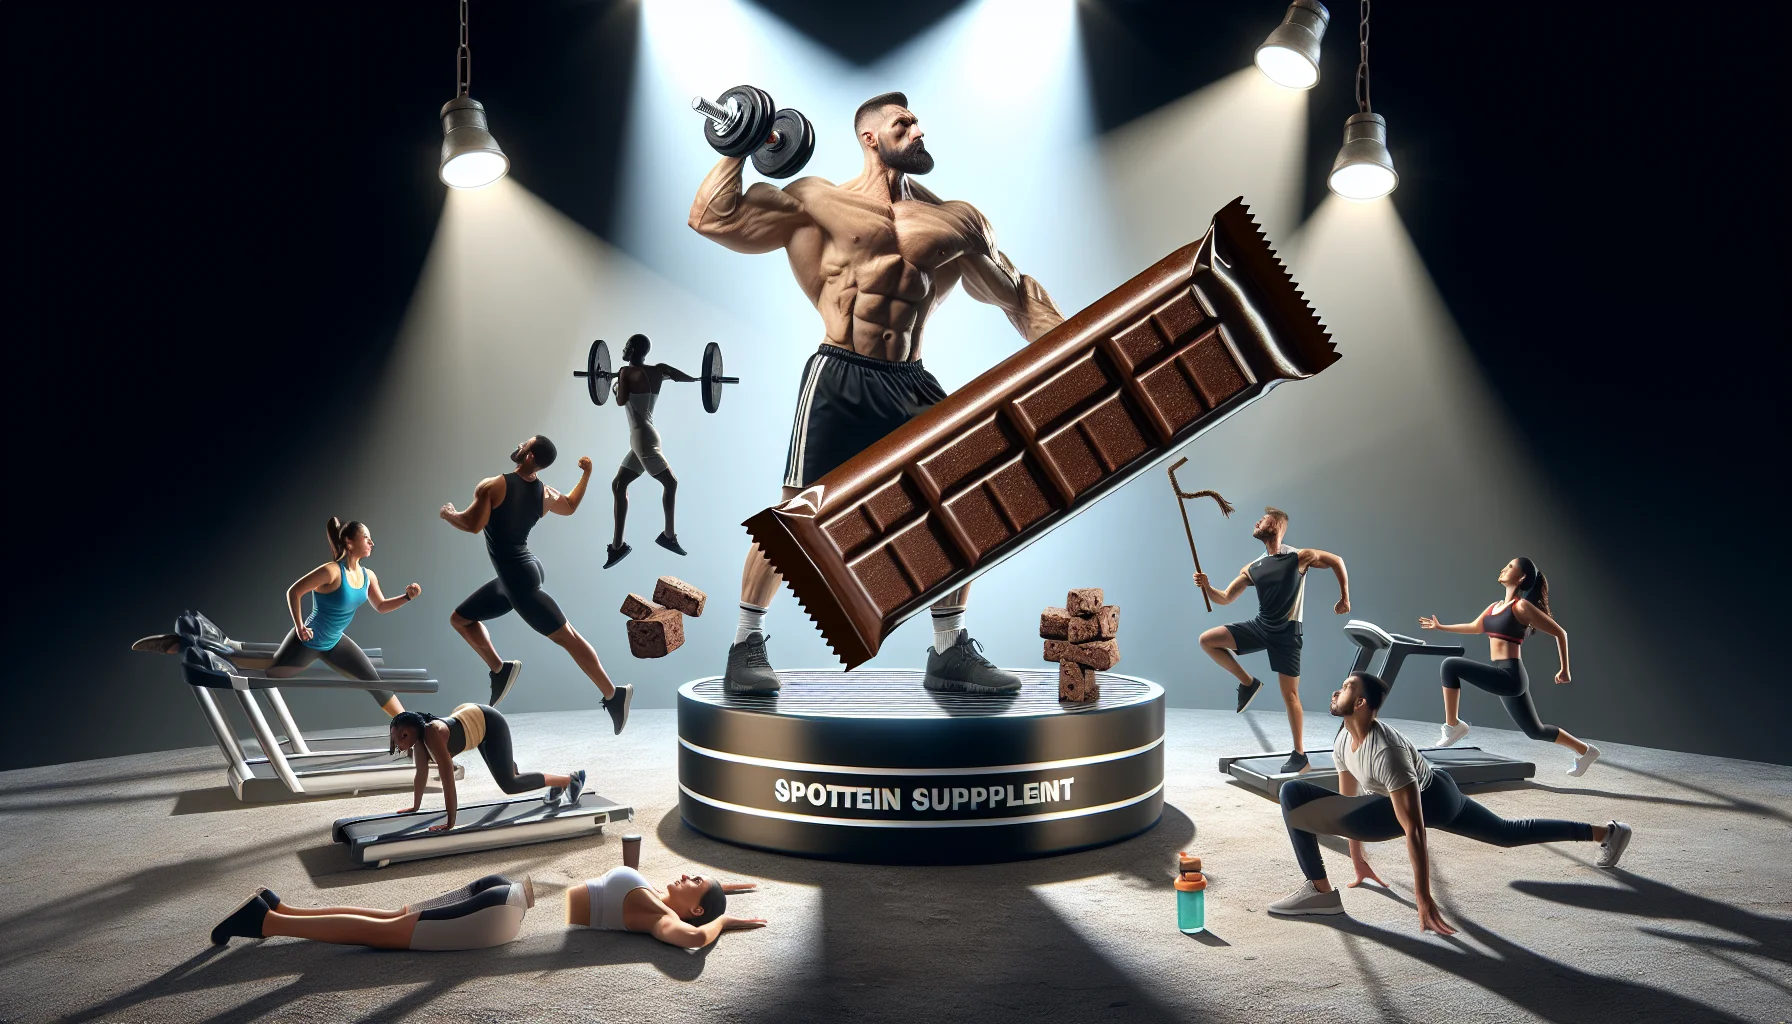 Create a humorous and realistic scene showcasing sports supplements exemplified by brown protein bars not branded, placed on a pedestal with a spotlight shining on them. Around them, a diverse group of people engaging in different sports activities. To add humor, imagine a strong, muscular Caucasian man in active athletic gear lifting a very light set of dumbbells, straining as if they're very heavy. Next, a Black woman running on a treadmill with an exaggeratedly large stride as if she's in mid-jump. Then, an Asian male doing push-ups with one finger, and a South Asian female doing yoga in a very twisted and complex pose.